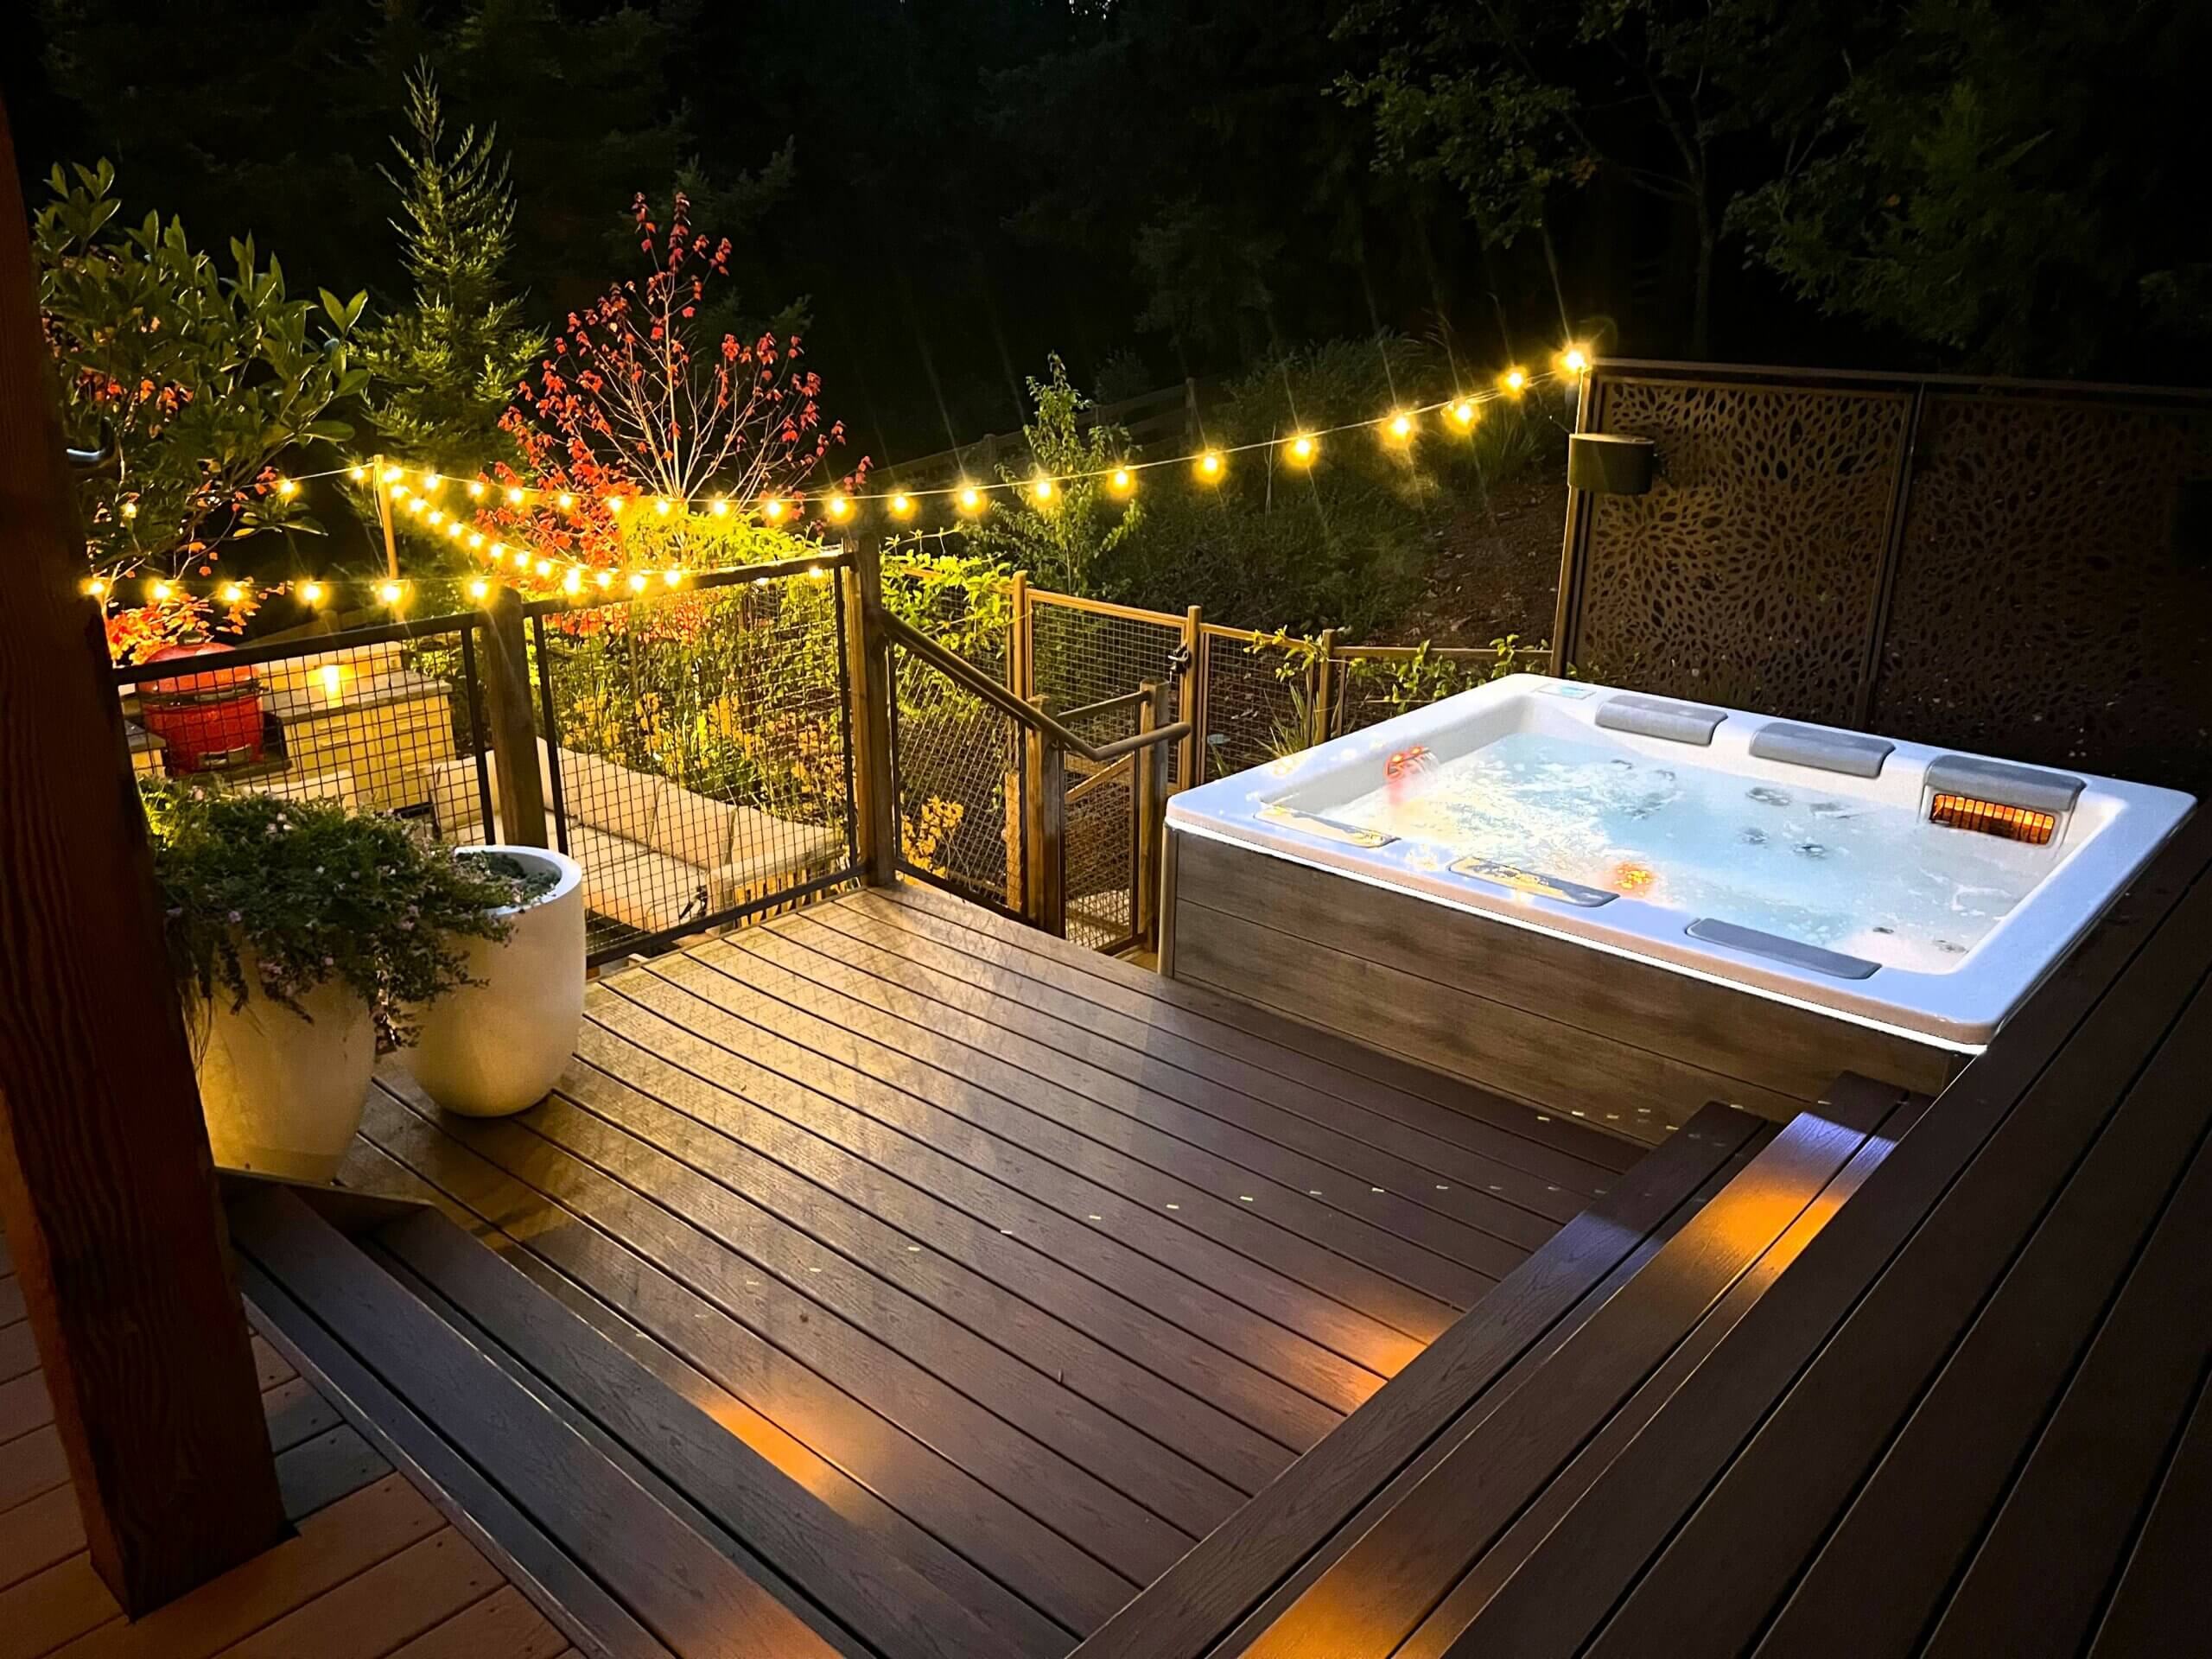 Hot tub deck perched above firepit and seating area of sloped Santa Cruz backyard with a view